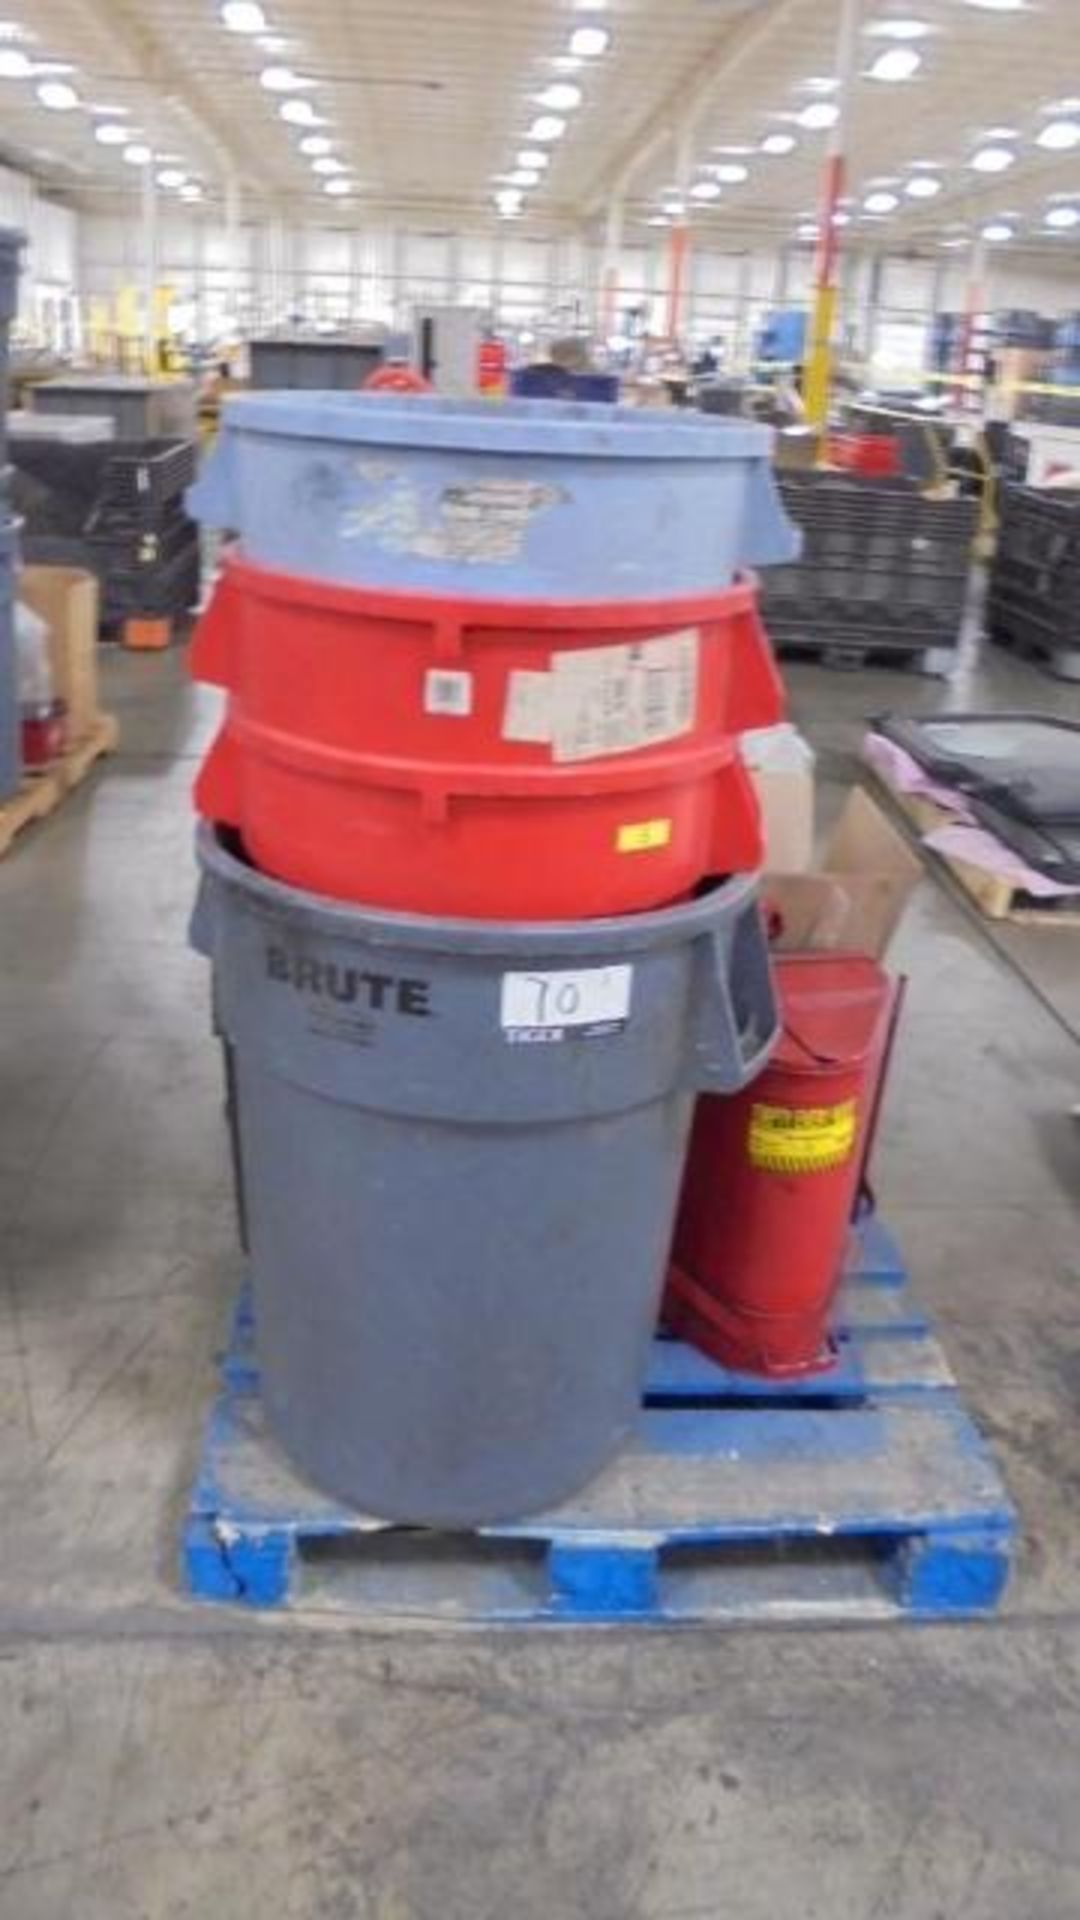 Lot Consisting of Tool Balancer Hoist, Safety Cone, (10) Office Waste Bins, Eagle Oil Waste Can